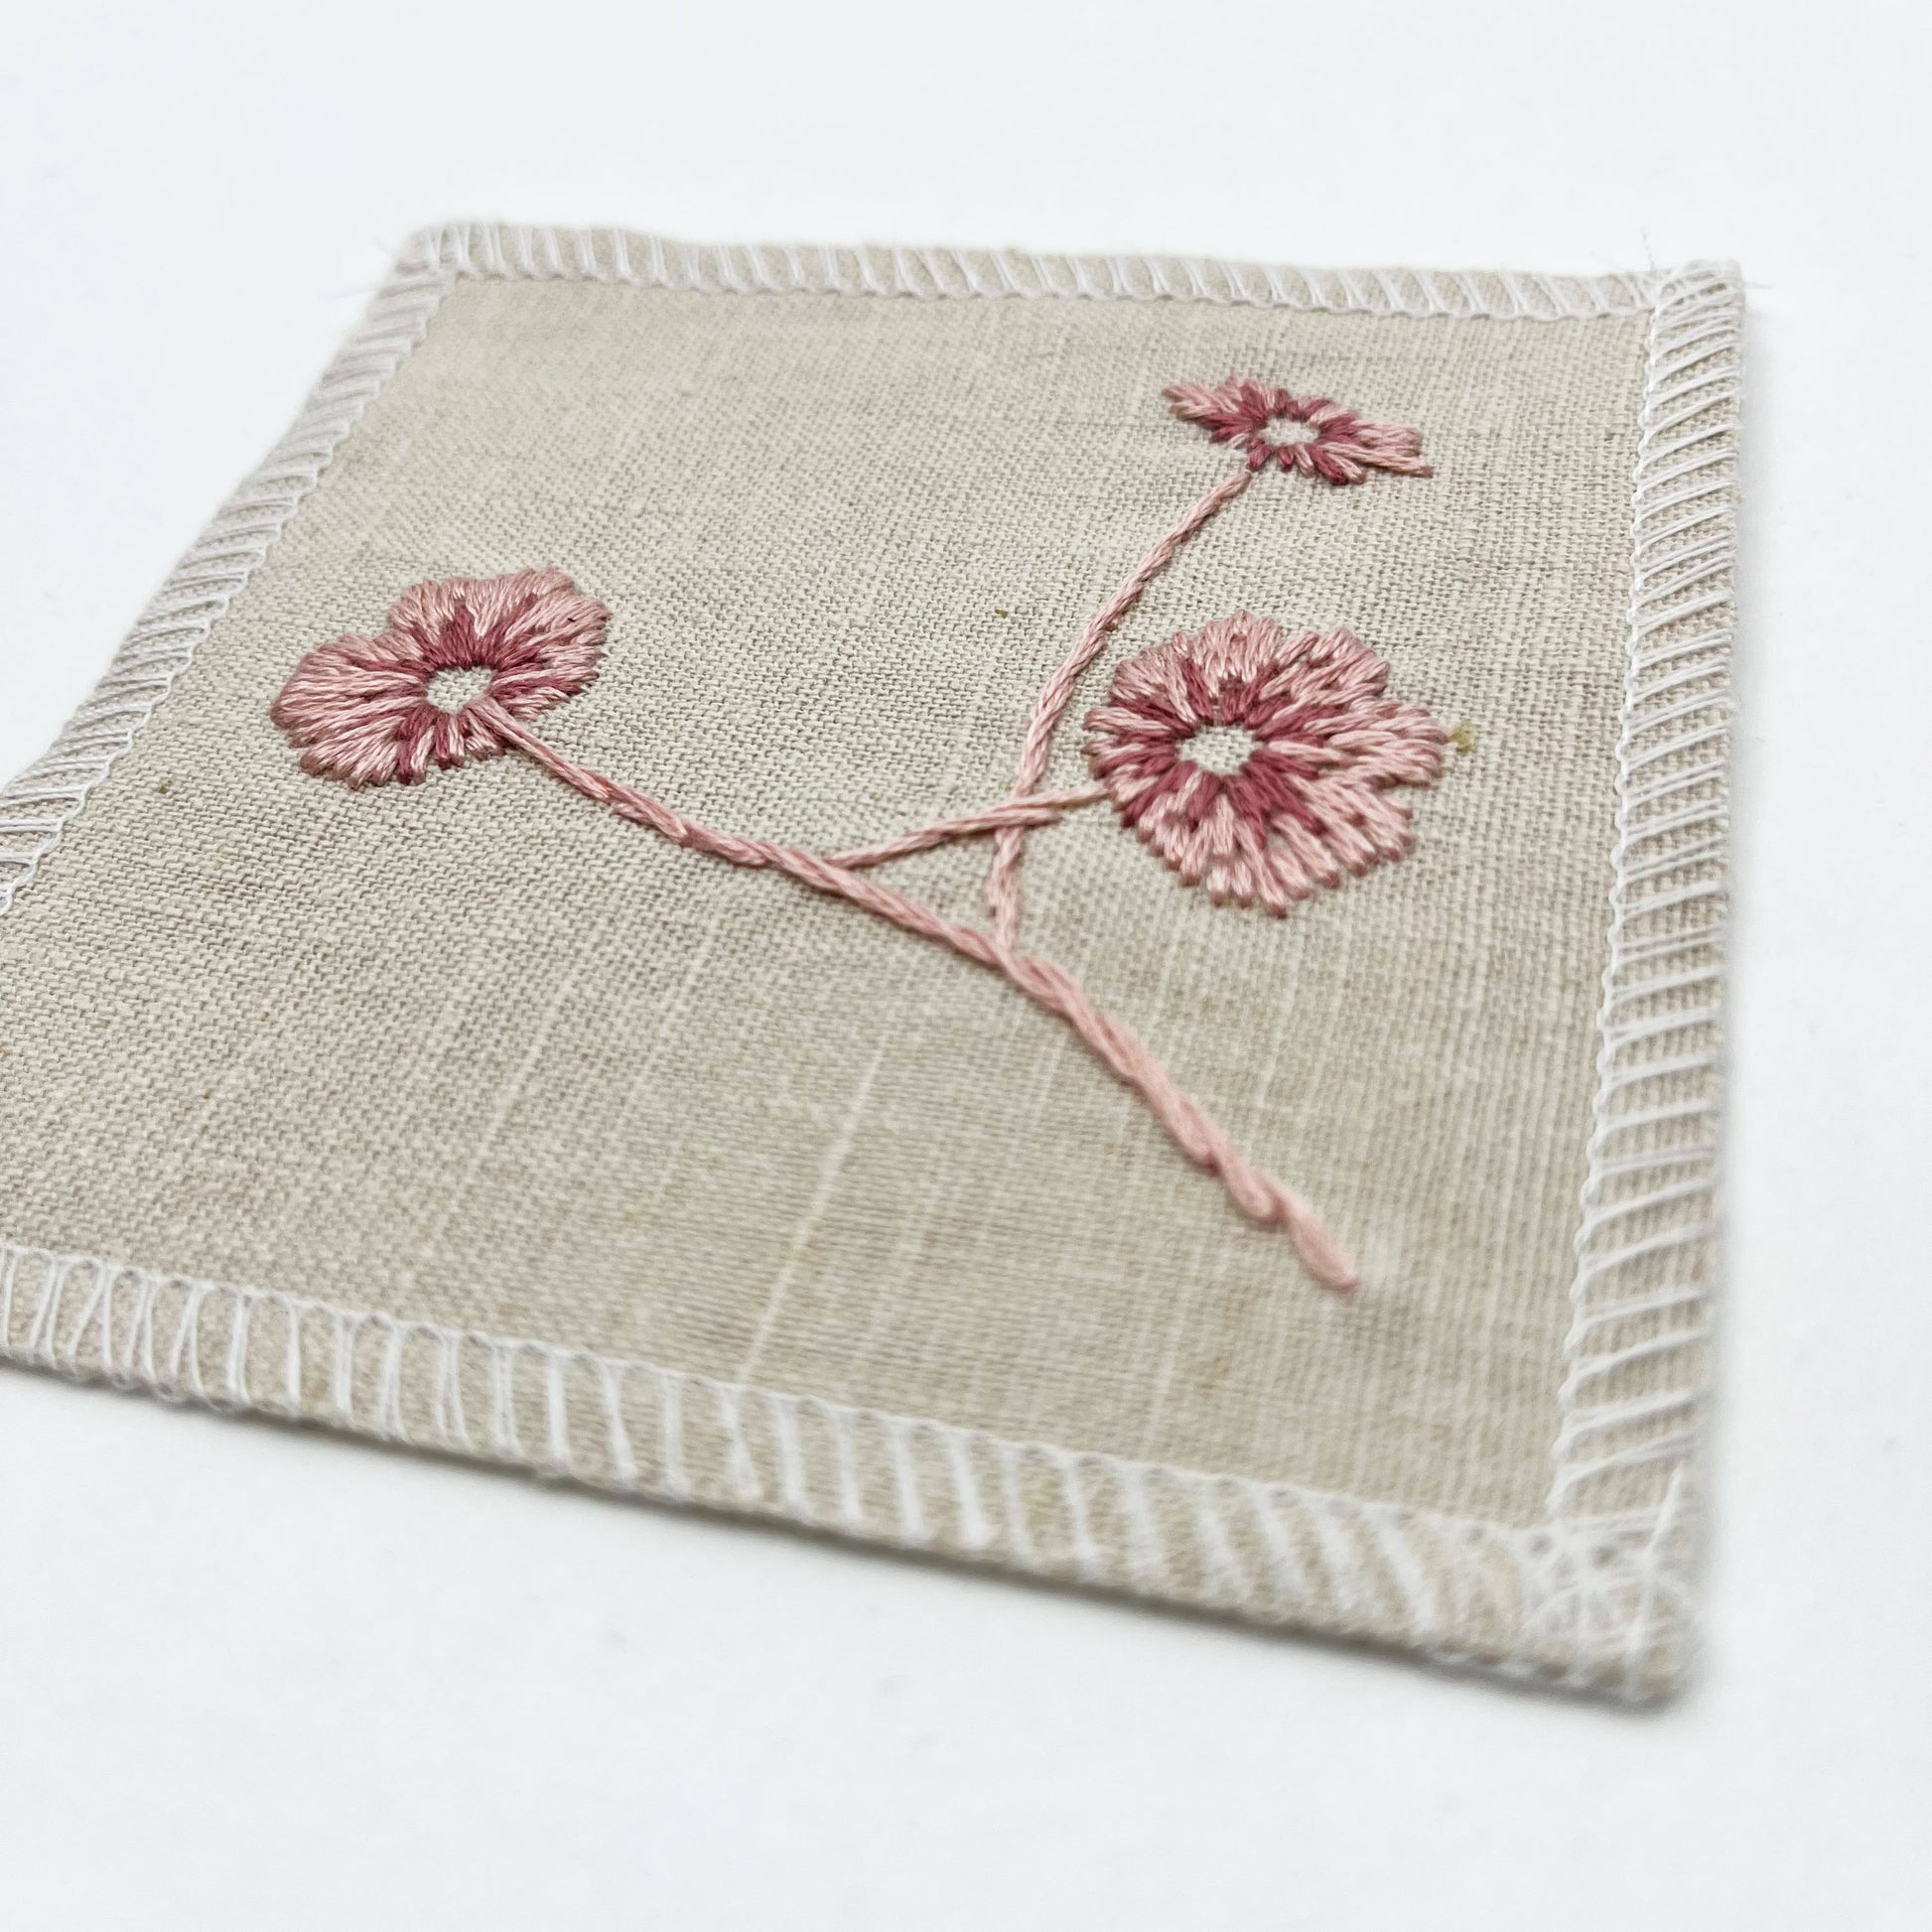 a close up angled view of a natural colored square patch, hand embroidered with three poppies on a stem, in shades of pink, with overlocked edges, on a white background